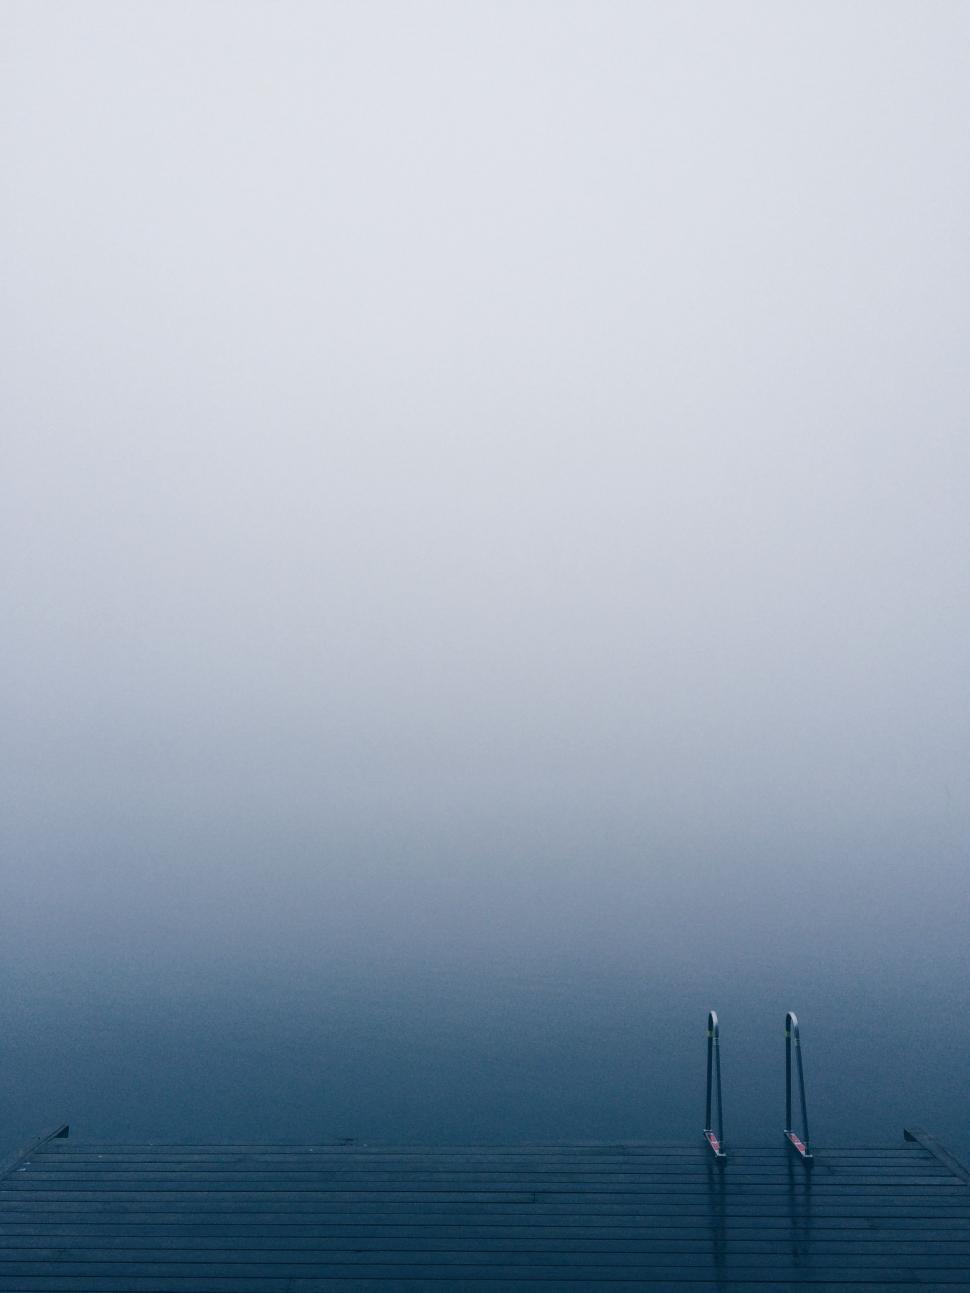 Free Image of Foggy Day at a Pier With Two Poles 